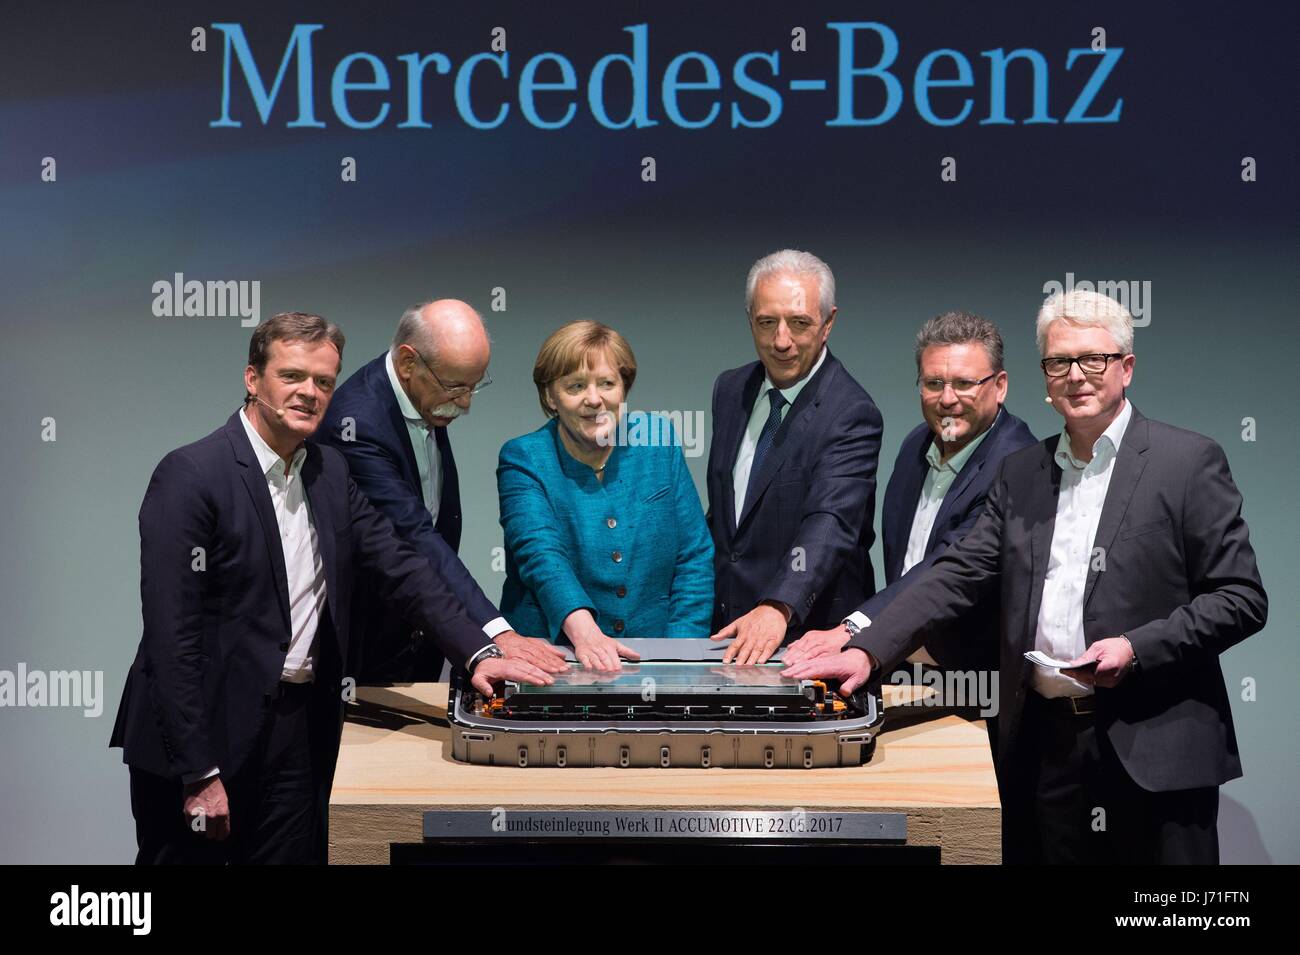 Kamenz, Germany. 22nd May, 2017. Markus Schaefer (l-r), Member of the Divisional Board of at Mercedes-Benz Cars; Dieter Zetsche, Chairman of the Board of Directors at Daimler; German Chancellor Angela Merkel (CDU); Premier of Saxony Stanislaw Tillich (CDU); Frank Deiss, Head of Powertrain Production; and Managing Director Deutsche Accumotive GmbH Frank Blome, pictured with a battery case at the laying of the foundation stone for an Accumotive battery factory in Kamenz, Germany, 22 May 2017. Credit: dpa picture alliance/Alamy Live News Stock Photo